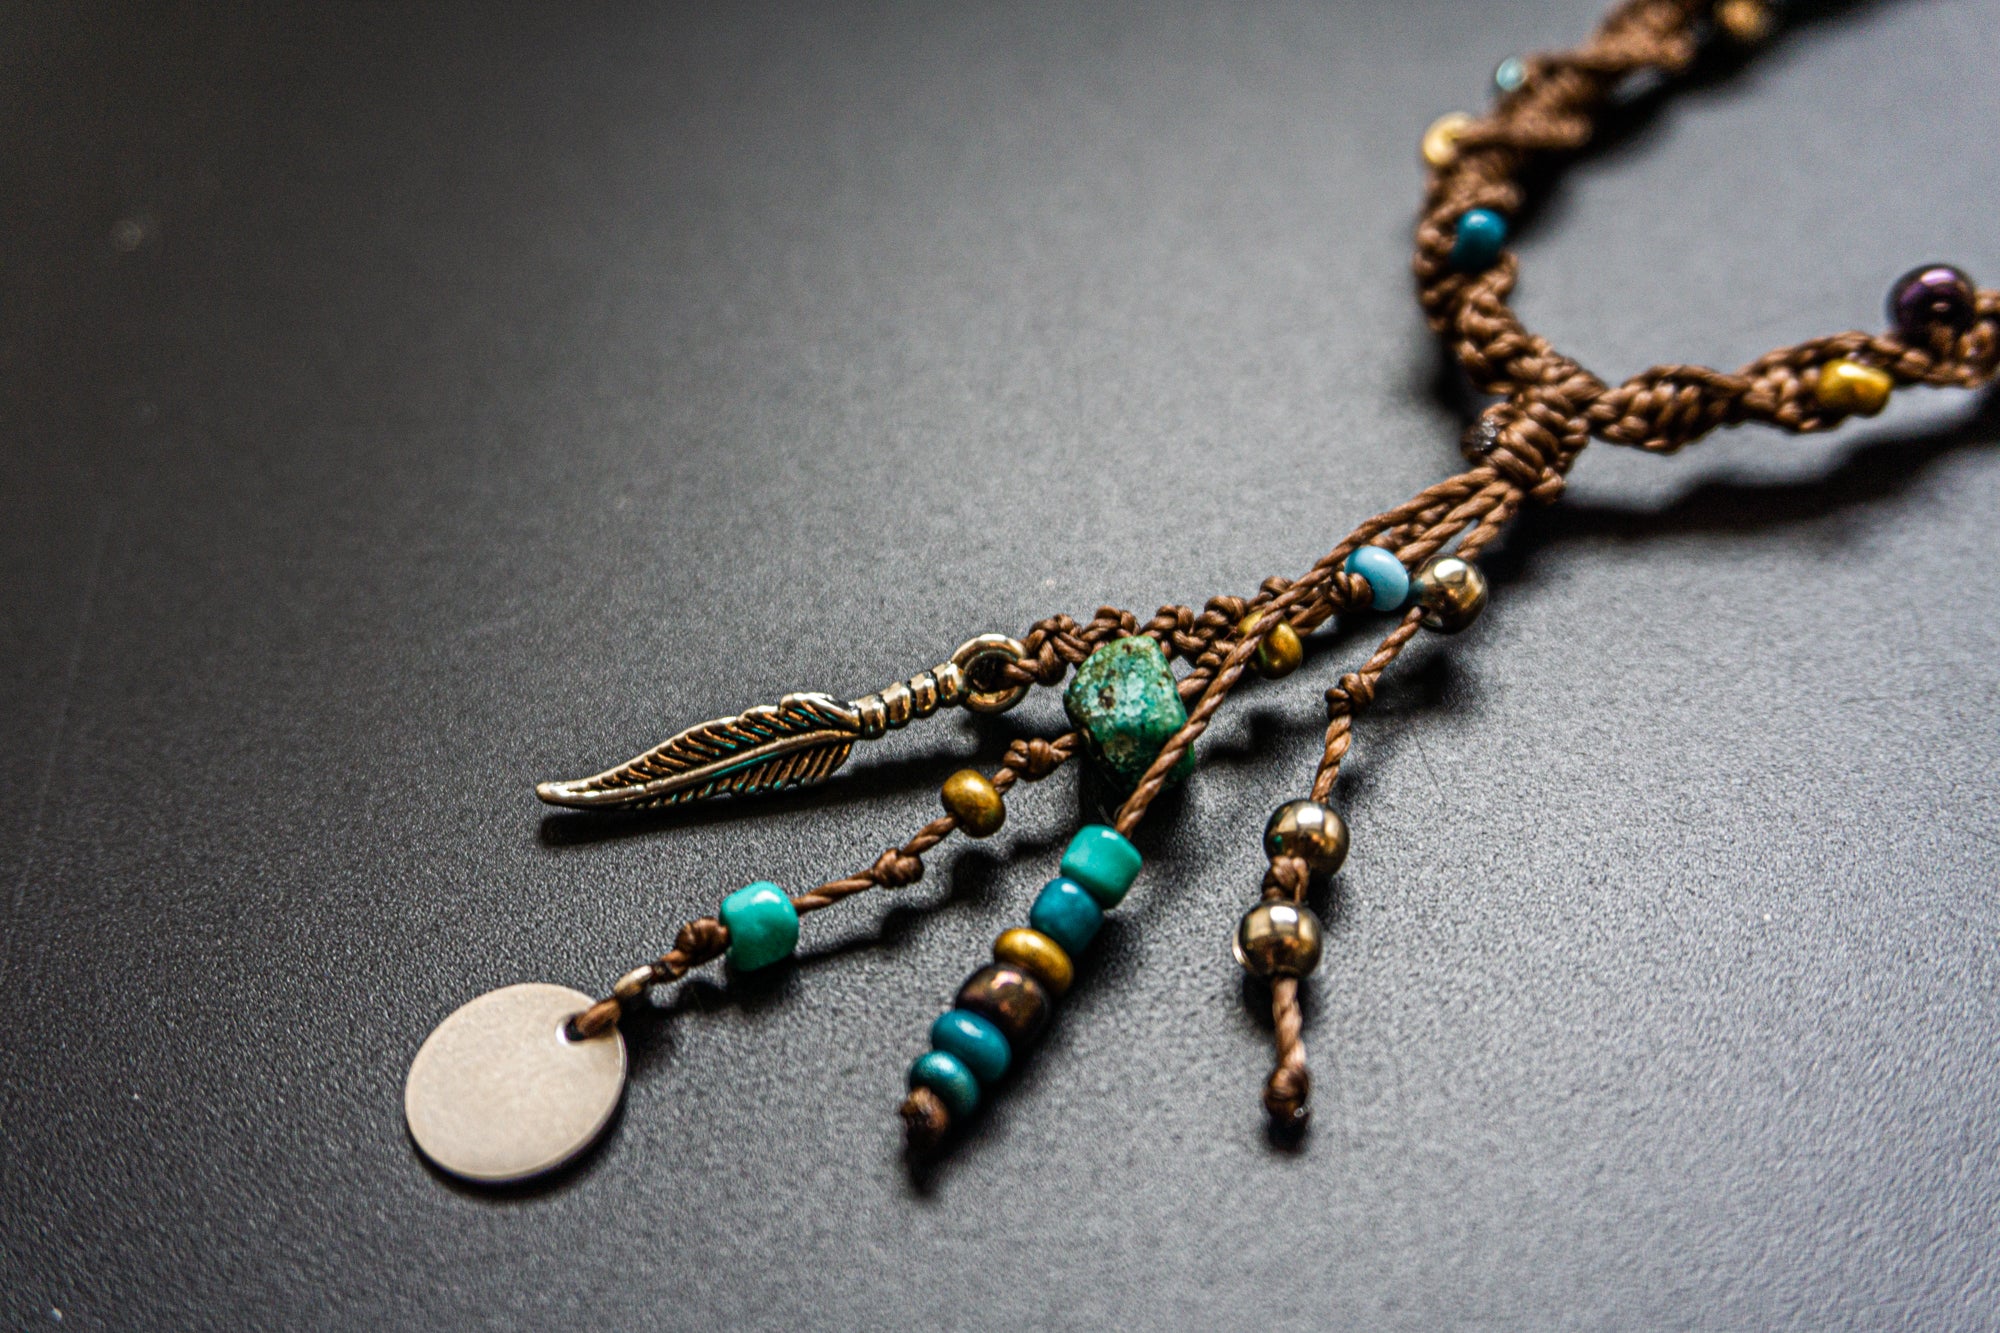 necklace with turquoise and silver charms- wander jewellery